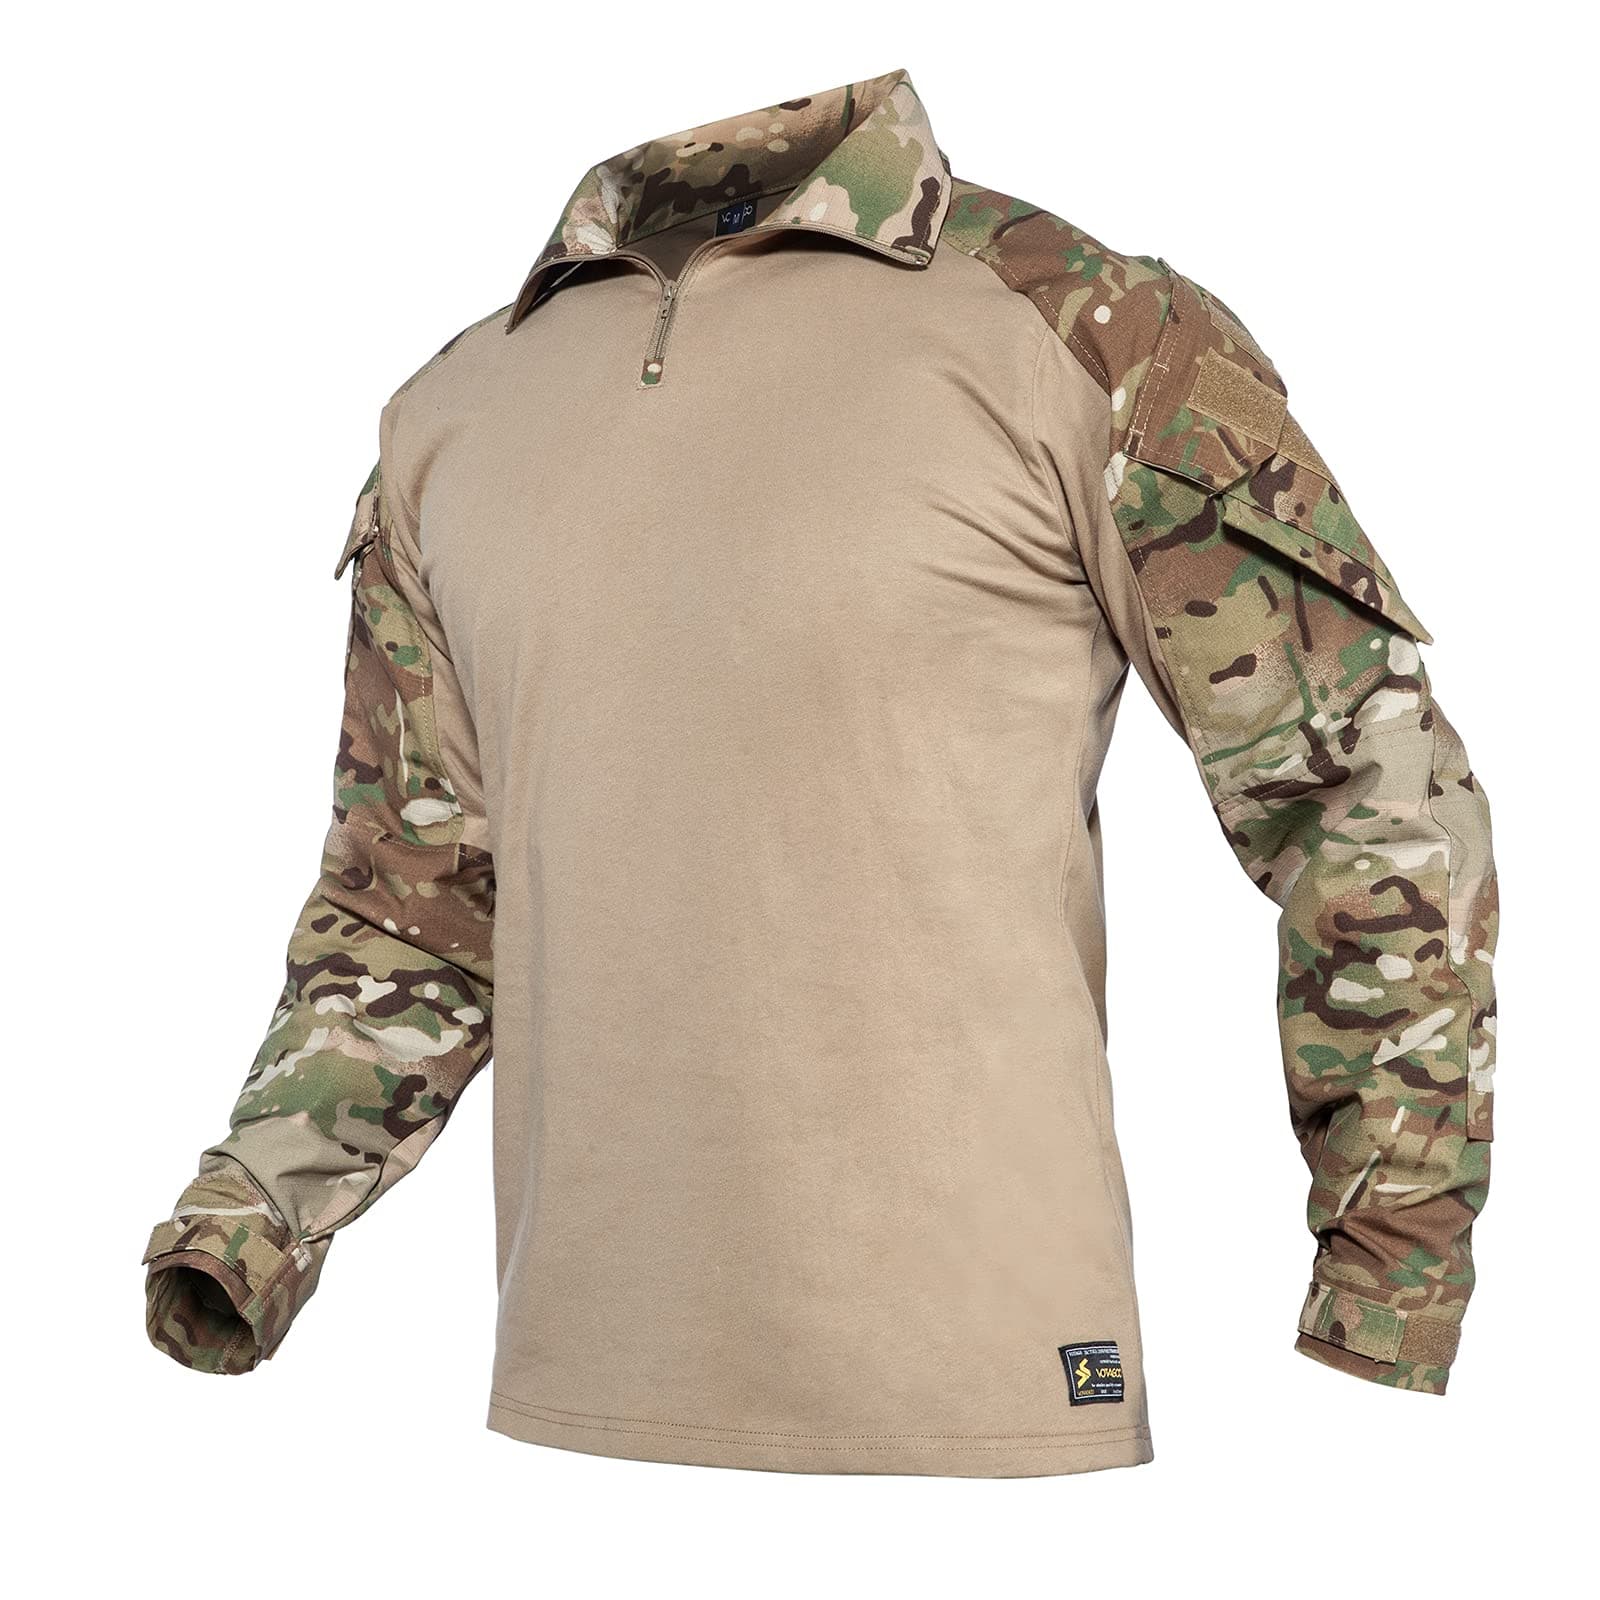 Army Tactical Desert Combat Shirt With Elbow Pad - G3